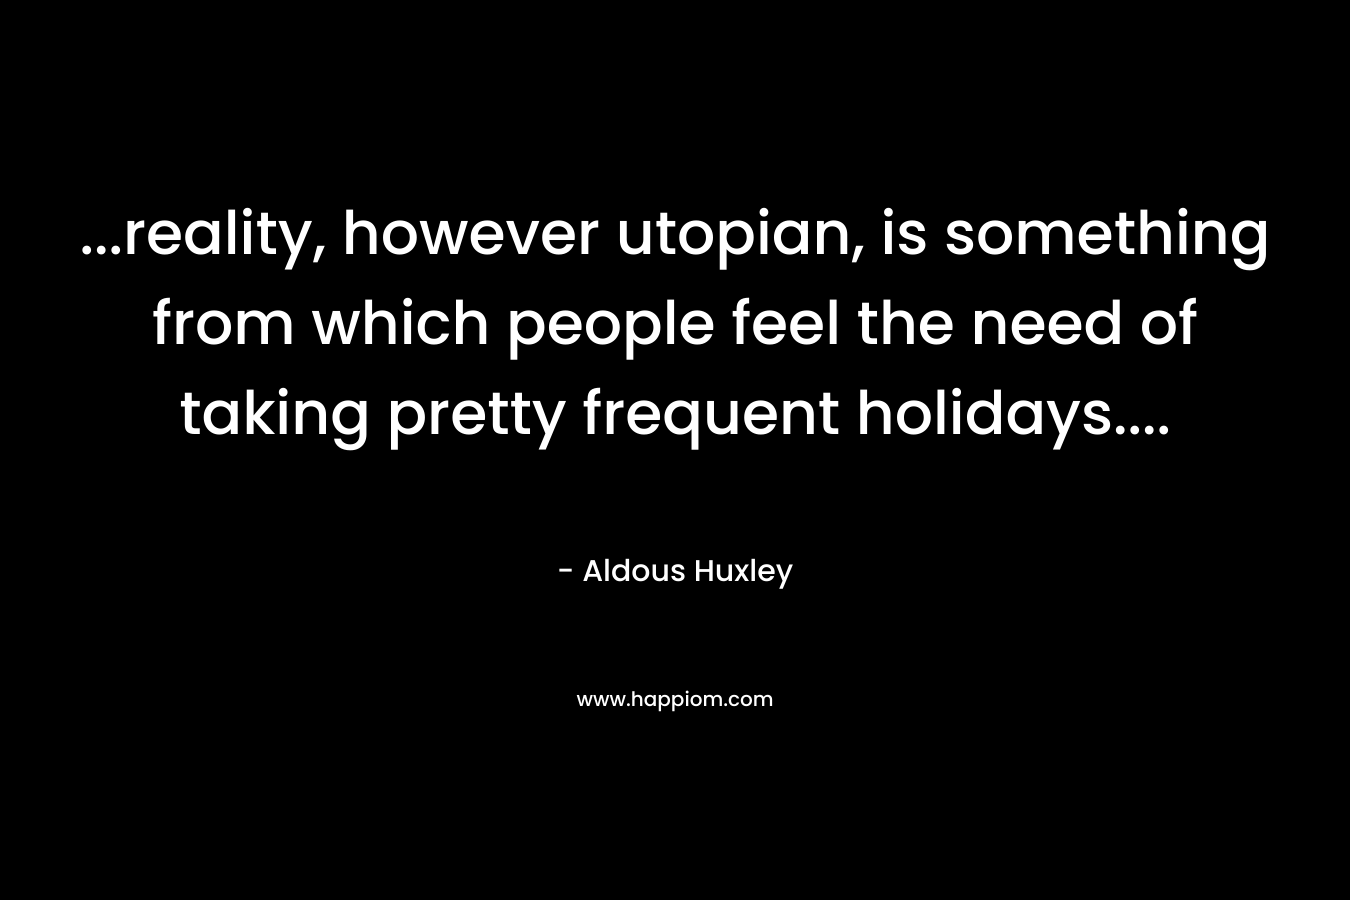 …reality, however utopian, is something from which people feel the need of taking pretty frequent holidays…. – Aldous Huxley